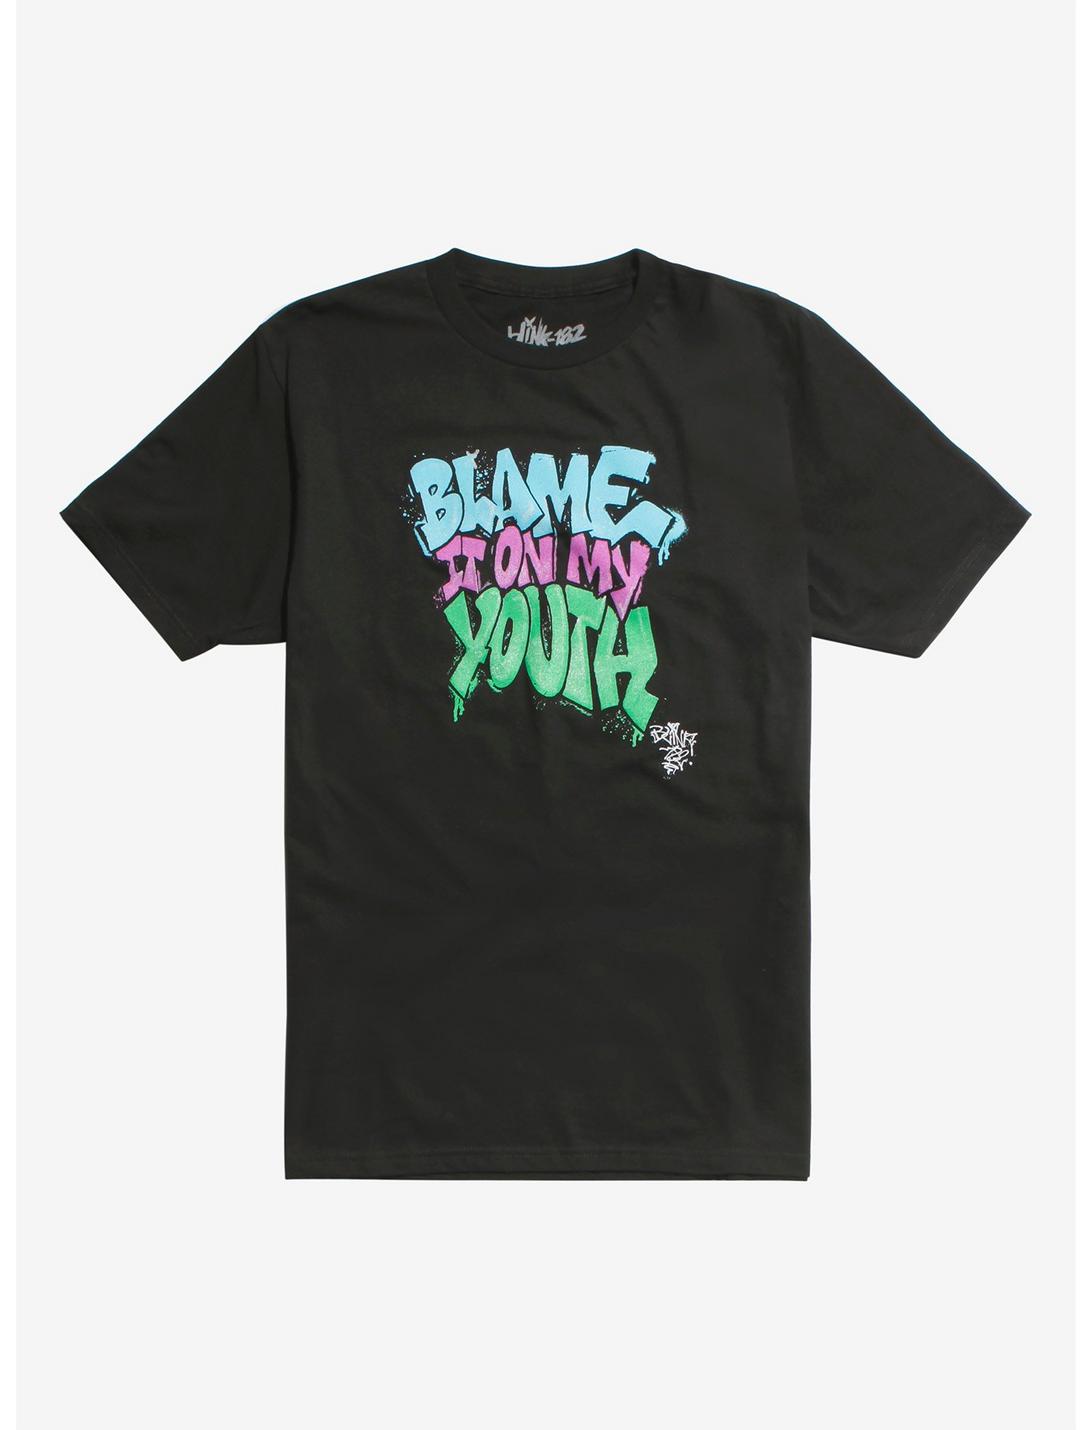 Blink-182 Blame It On My Youth T-Shirt, BLACK, hi-res